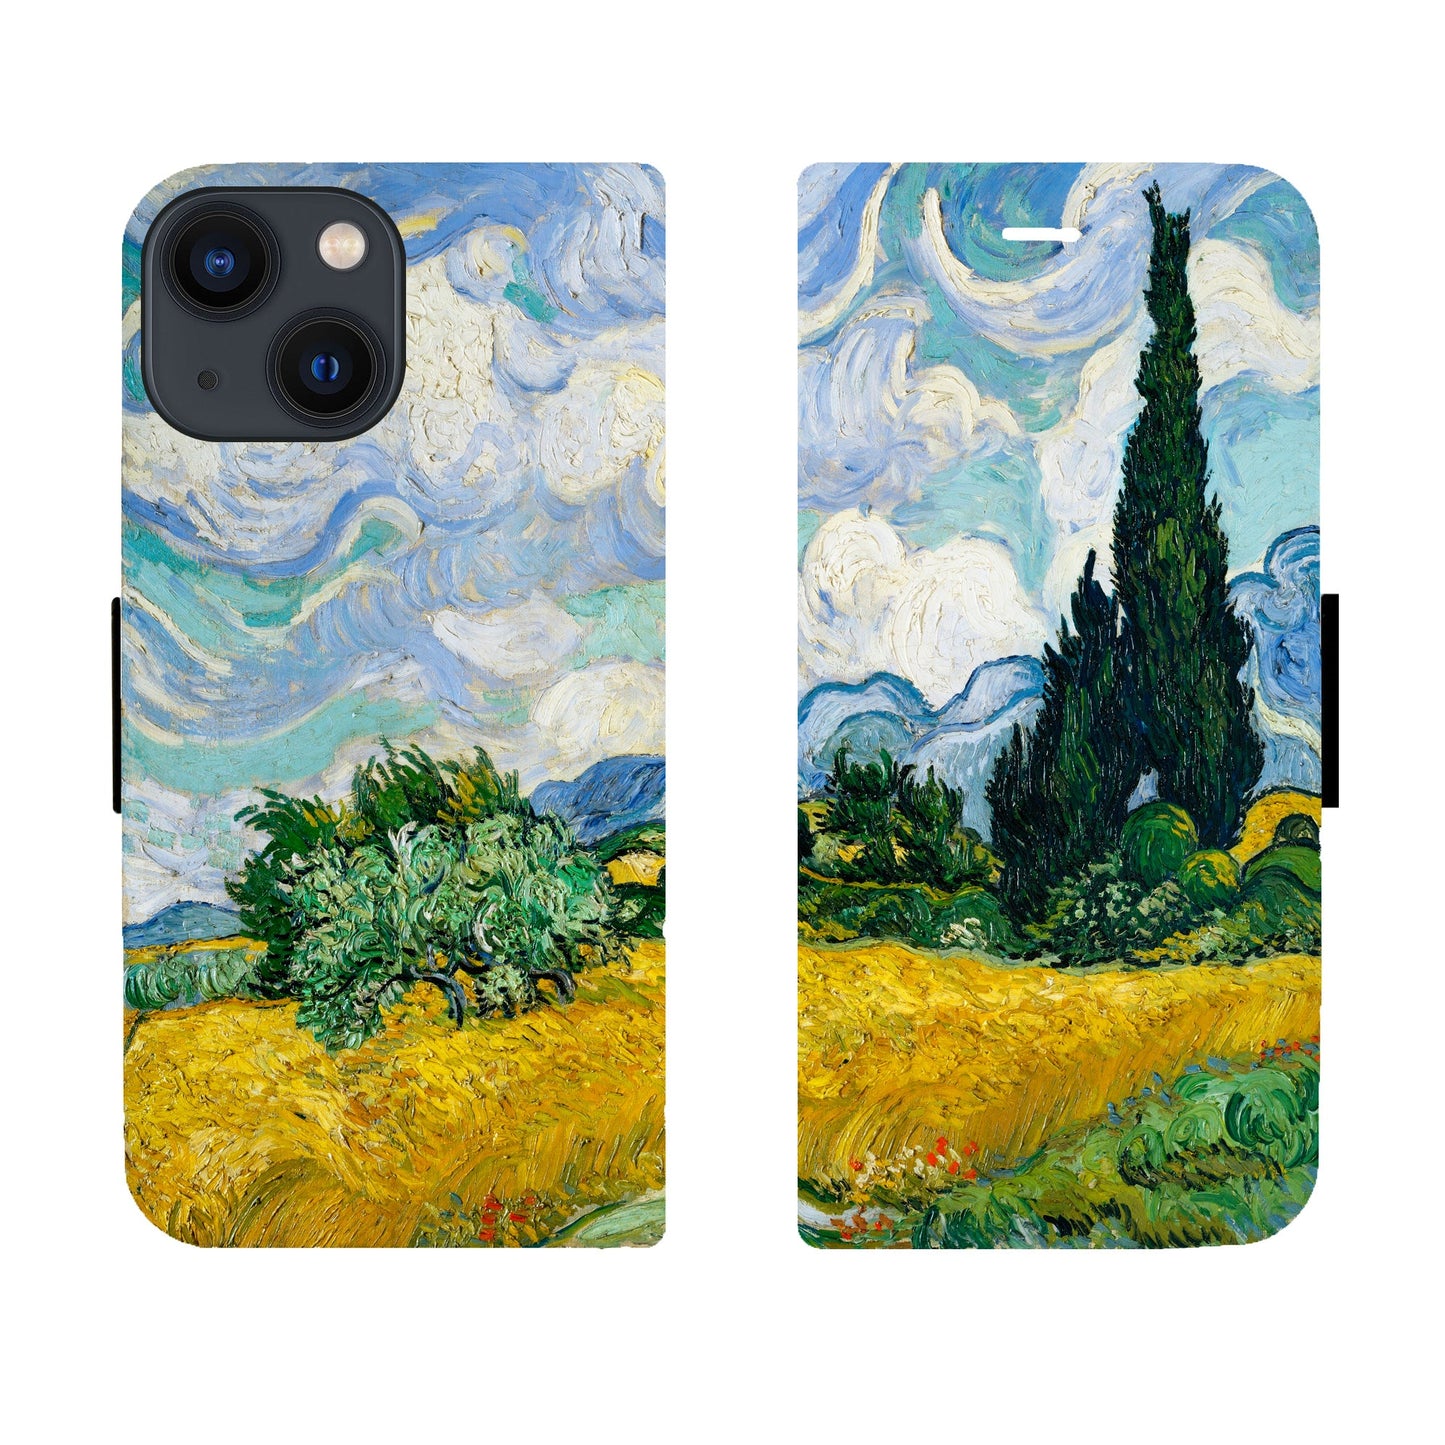 Van Gogh - Wheat Field Victor Case for iPhone